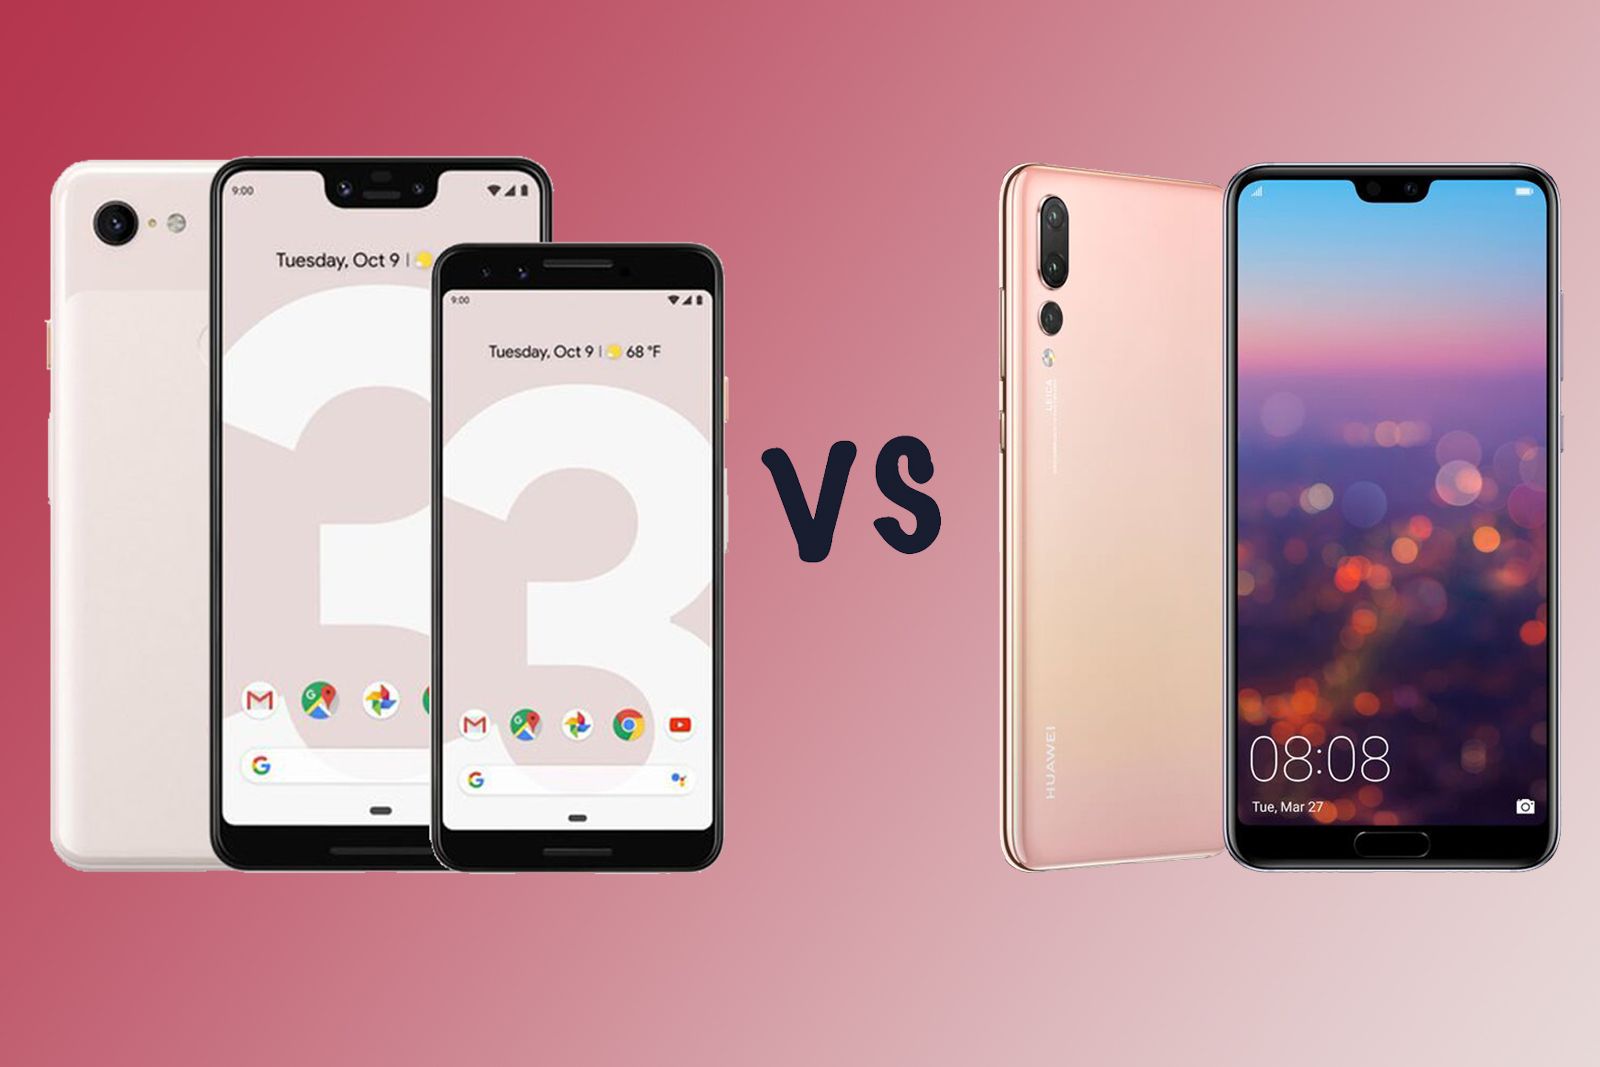 Google Pixel 3 and 3 XL vs Huawei P20 Pro How do they compare image 1